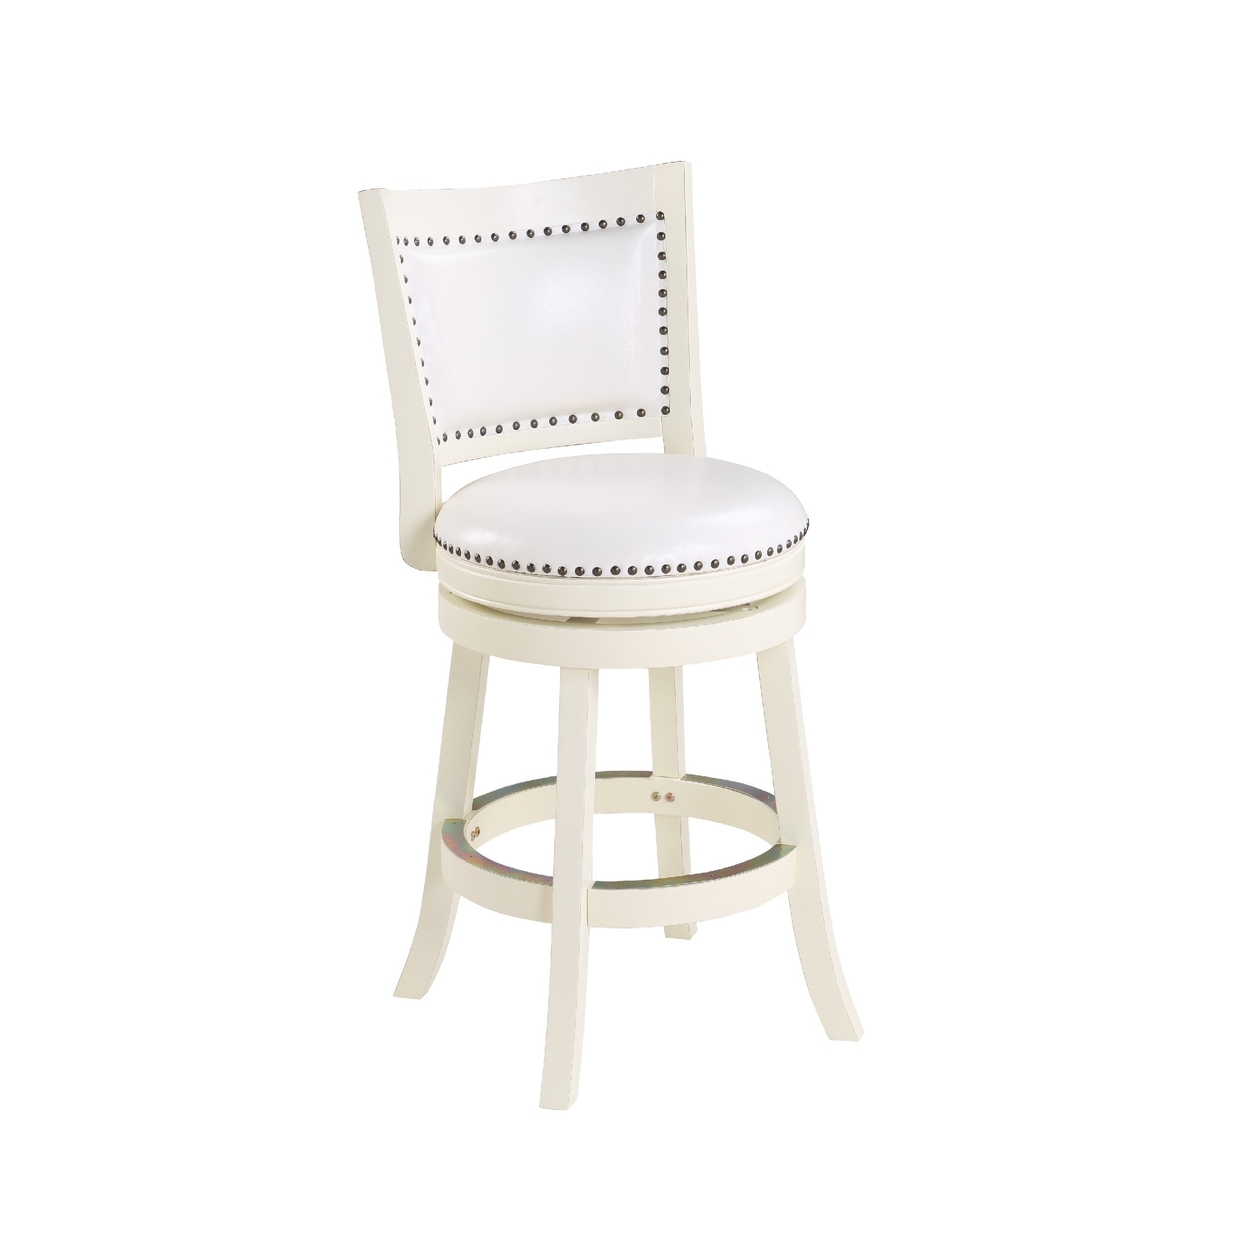 Sabi 24 Inch Swivel Counter Stool, Solid Wood, Faux Leather, White